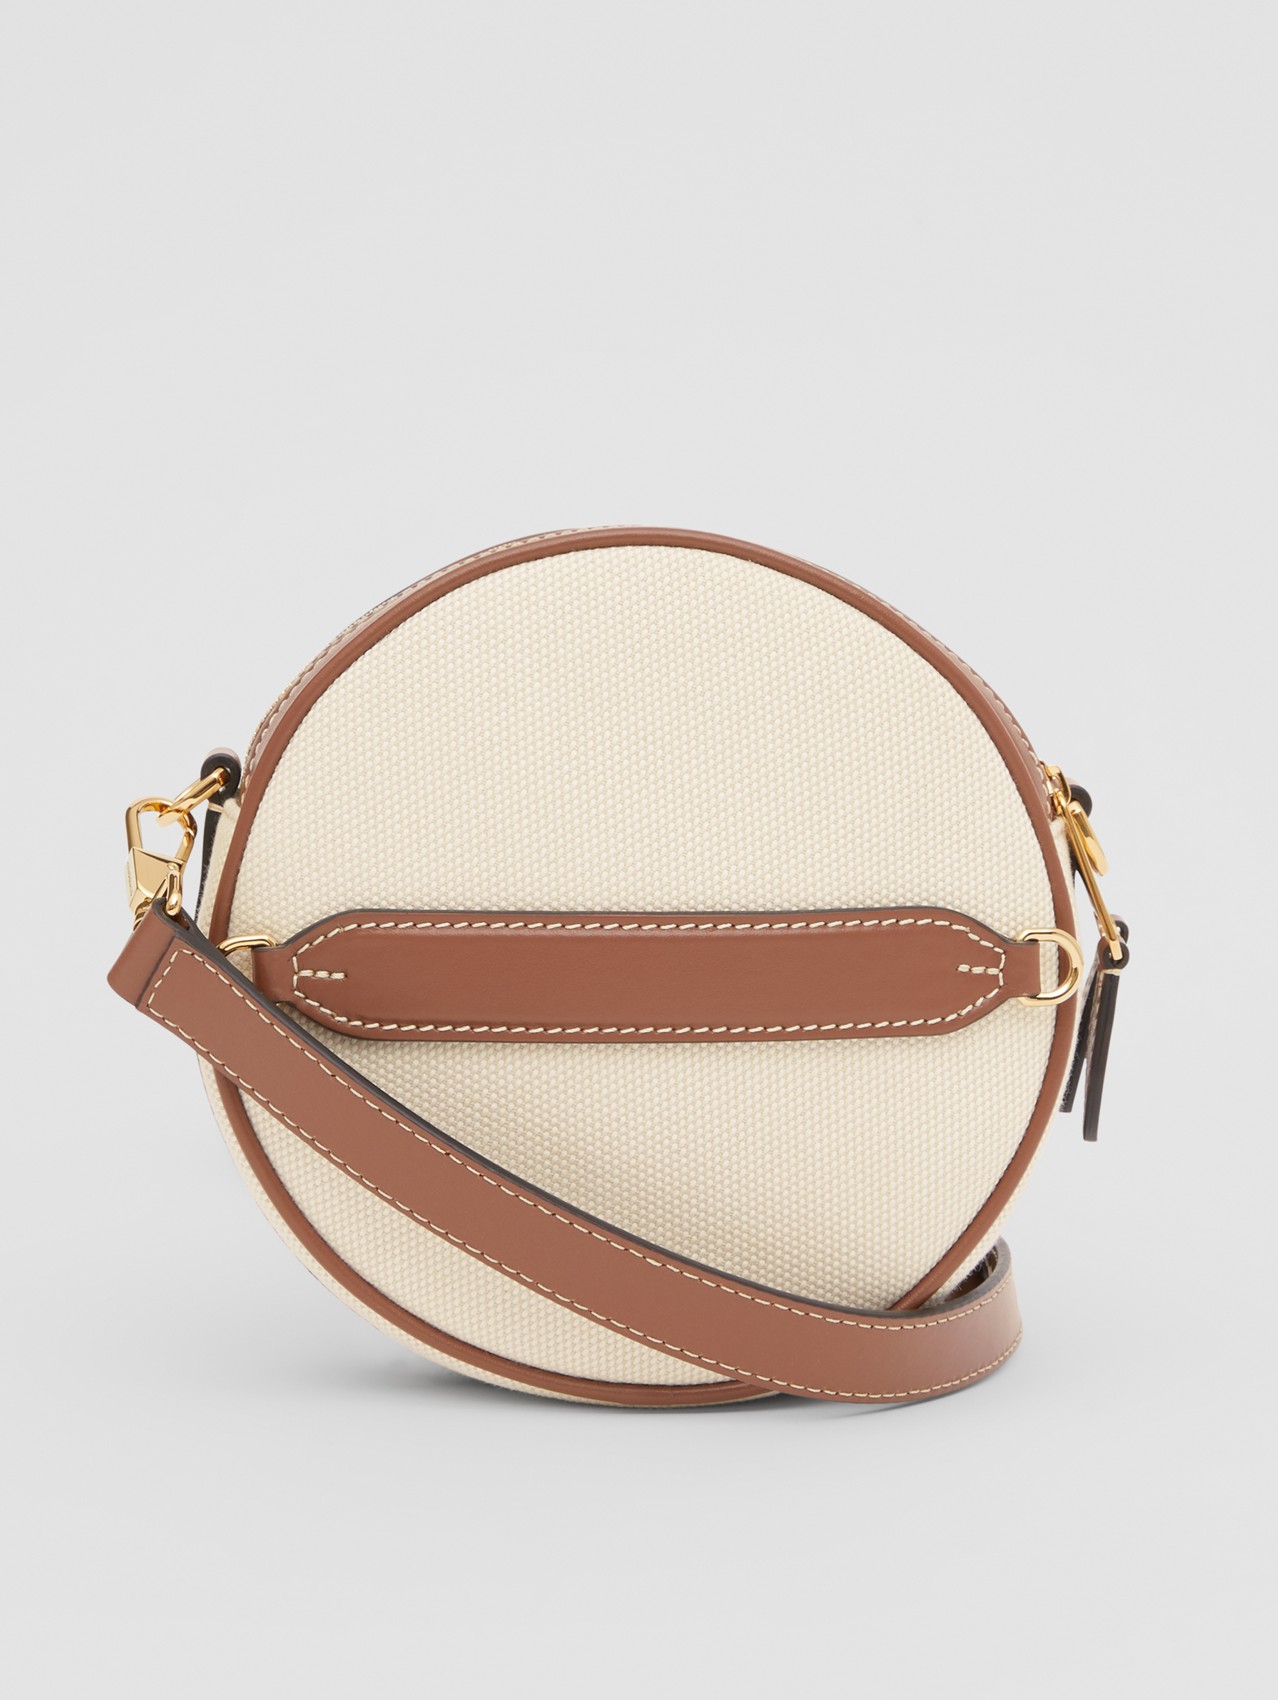 Logo Graphic Canvas and Leather Louise Bag in Natural/tan